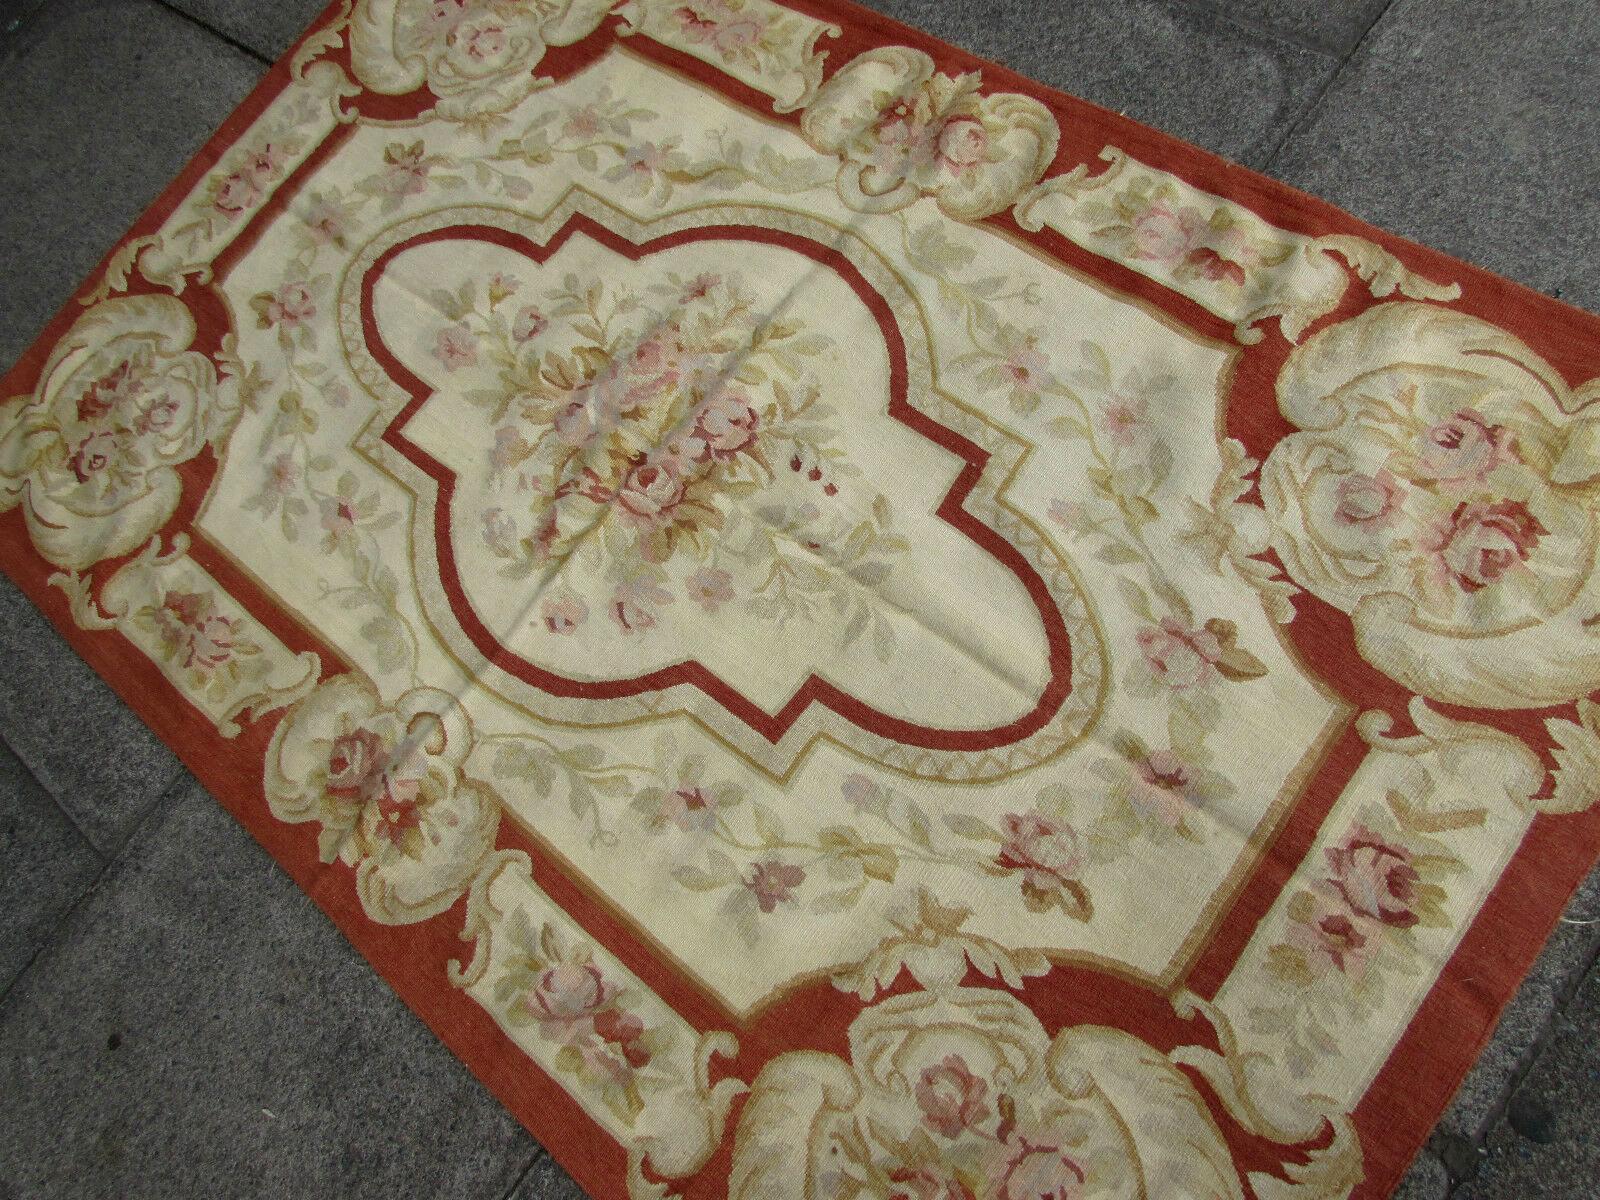 Handmade vintage French Aubusson rug in wool. This rug has been made in the end of 20th century, it is in original good condition.

?-condition: original good,

-circa: 1970s,

-size: 3.9' x 6' (118cm x 183cm),

-material: wool,

-country